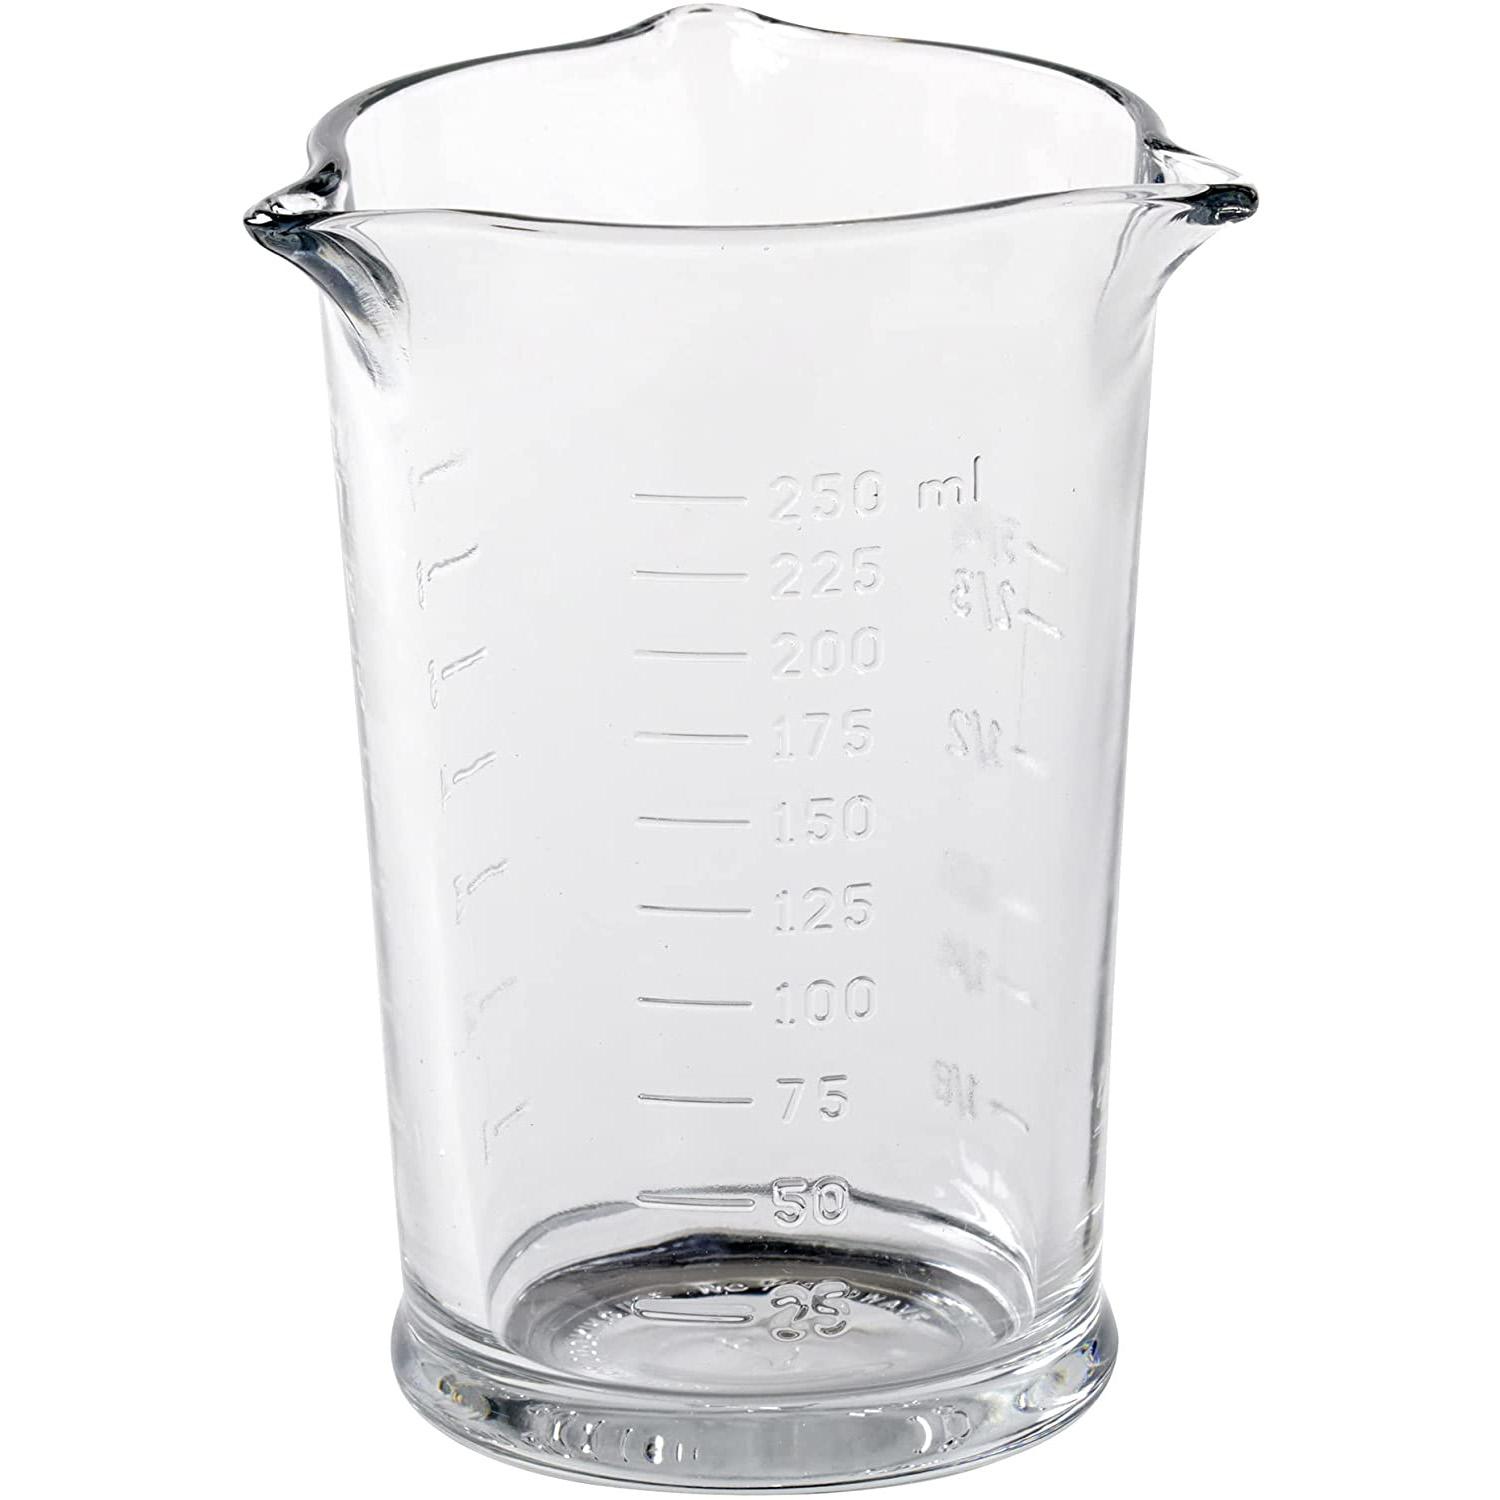 Anchor Hocking Triple Pour Measuring Cup for $3.49